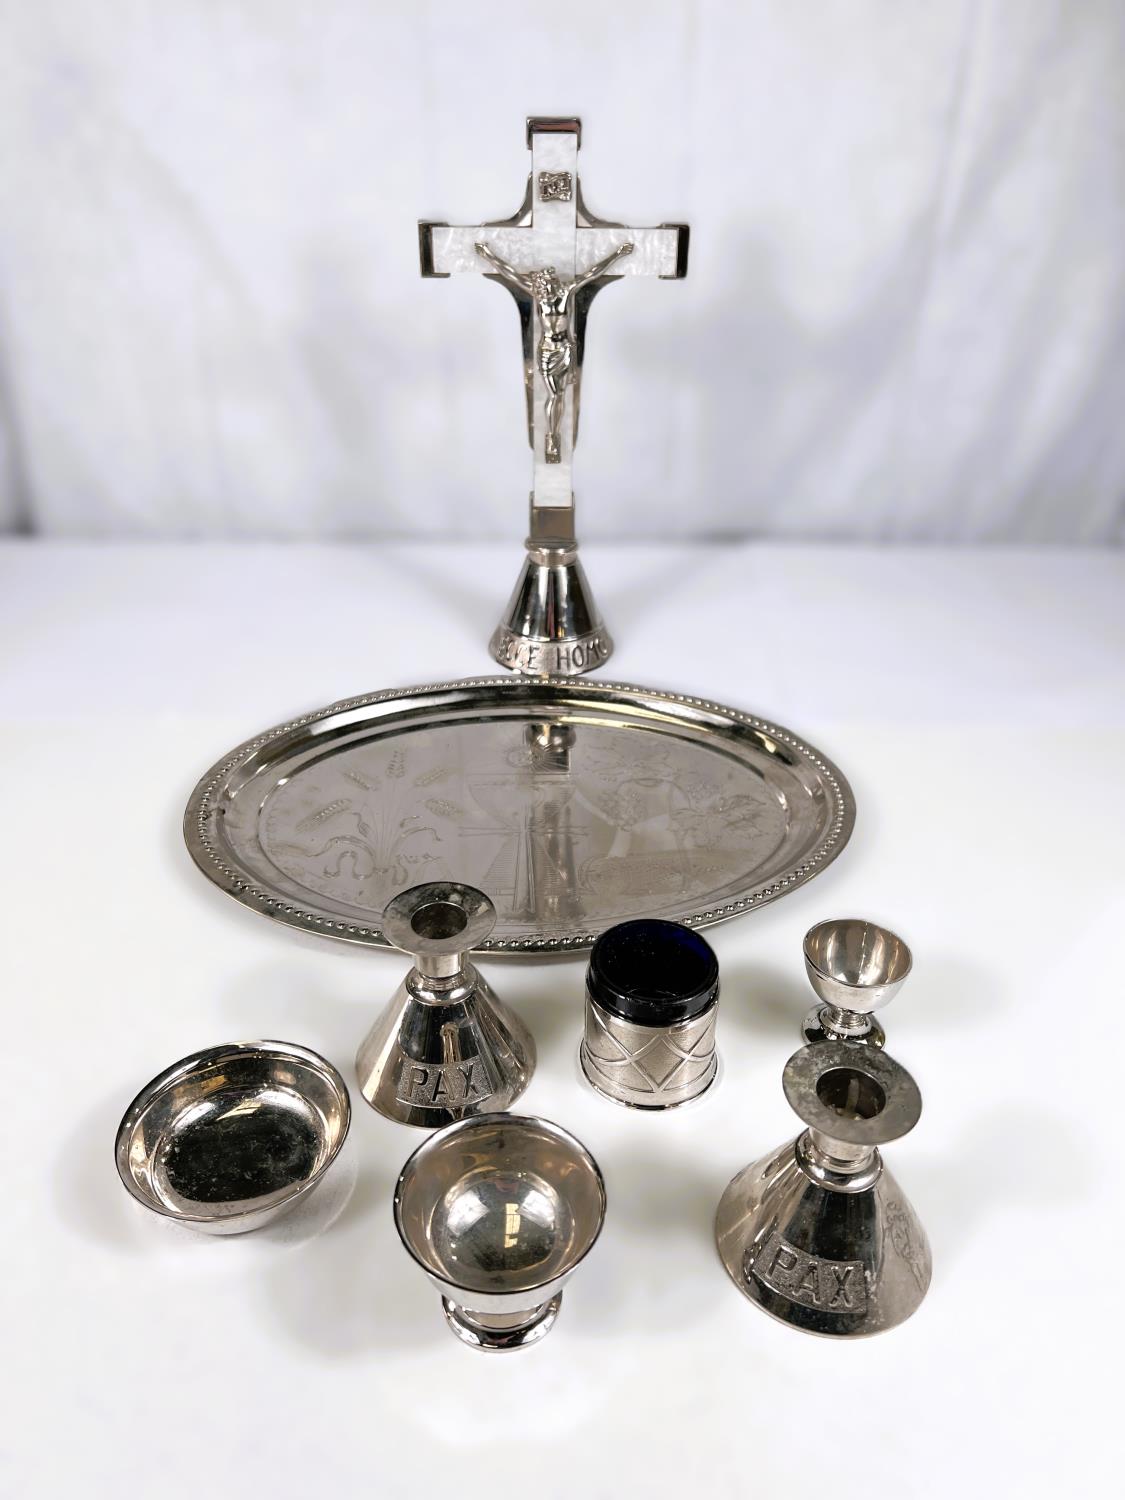 A silver plated altar set with crucifix, candlesticks etc